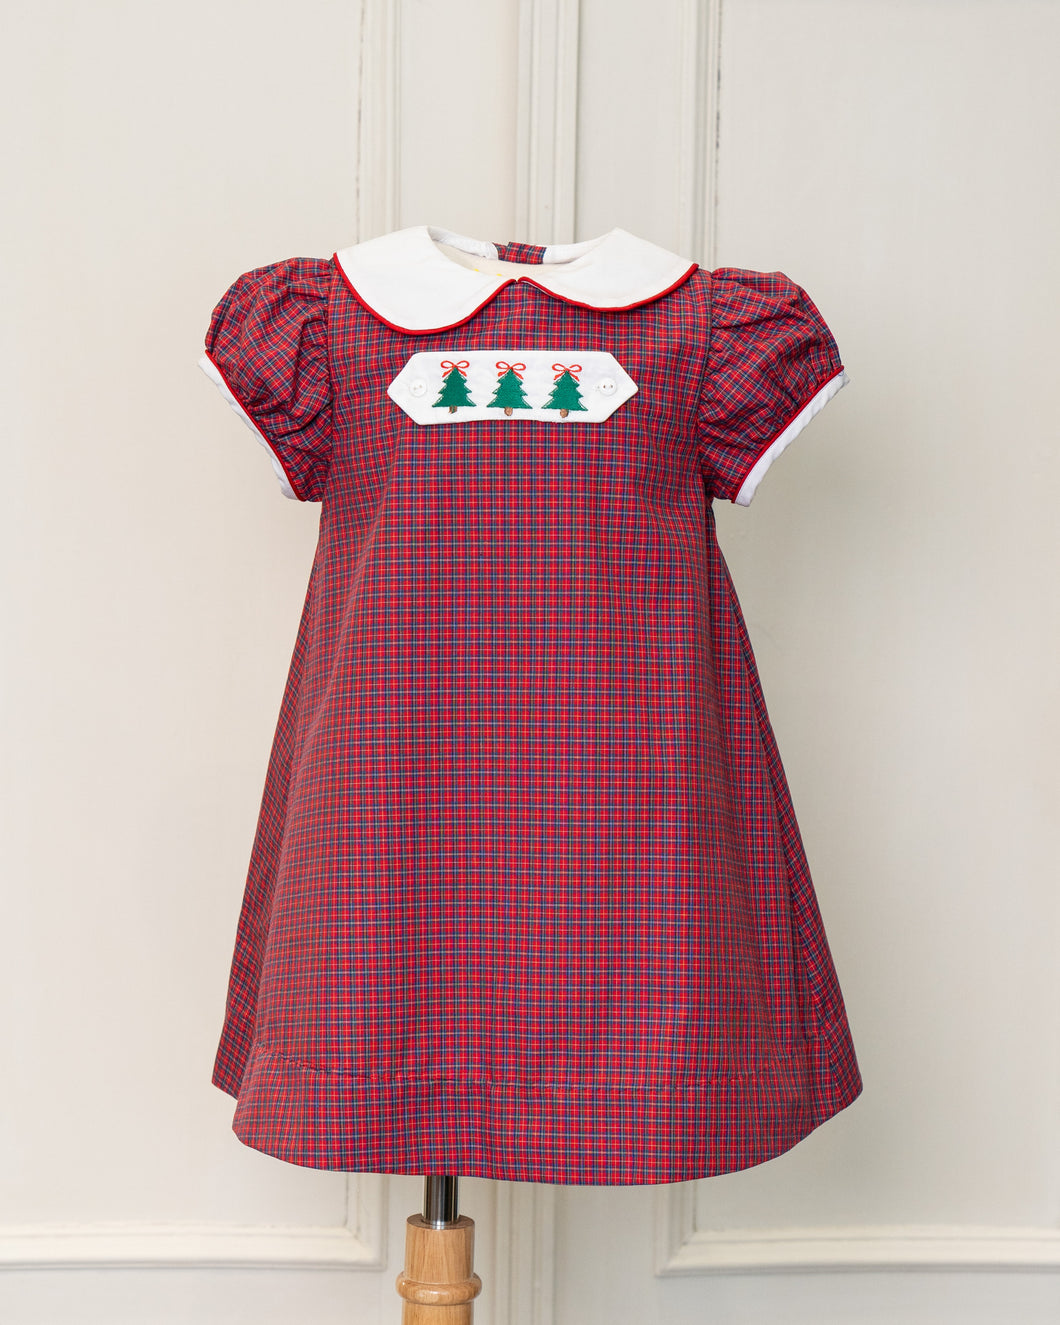 Little Girls Christmas A-Line Dress - Lucy Girls Red Plaid Tartan Red Dress With Reversible Tab